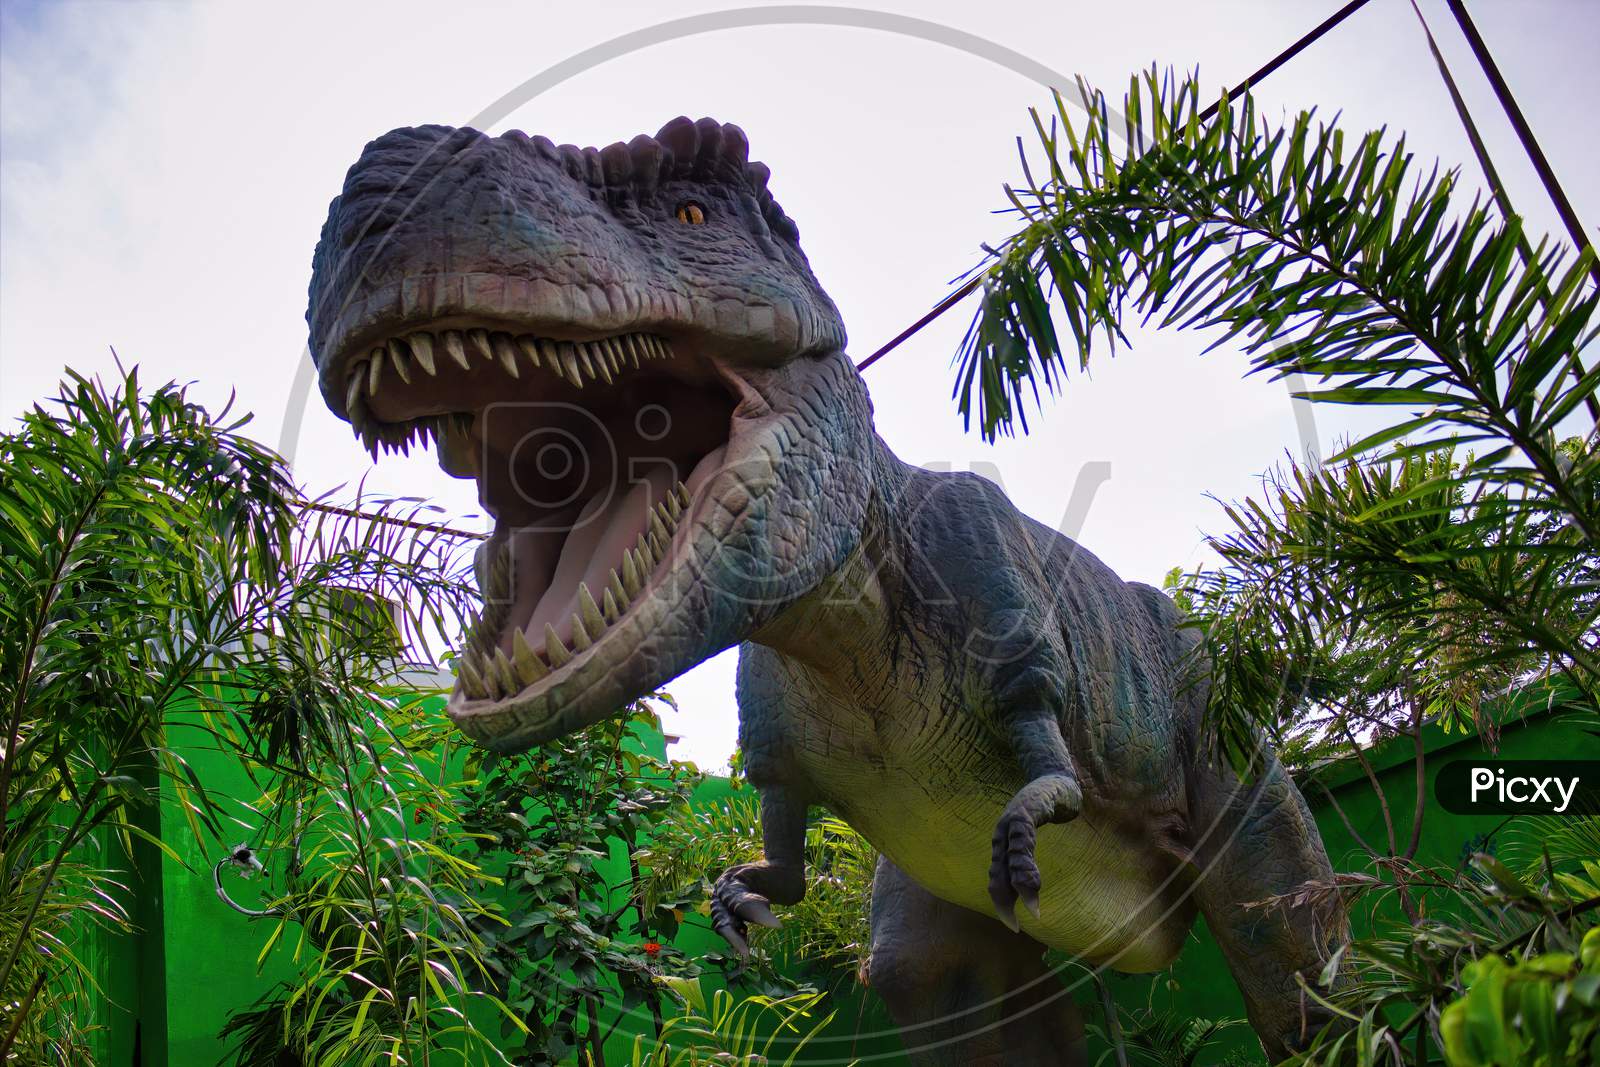 Pondicherry, South India - October 30, 2018: A Model Of A Tyrannosaurus, One Of A Many Model Of Dinosaur Kept In The Jurassic Park Themed Park Located In Tamil Nadu